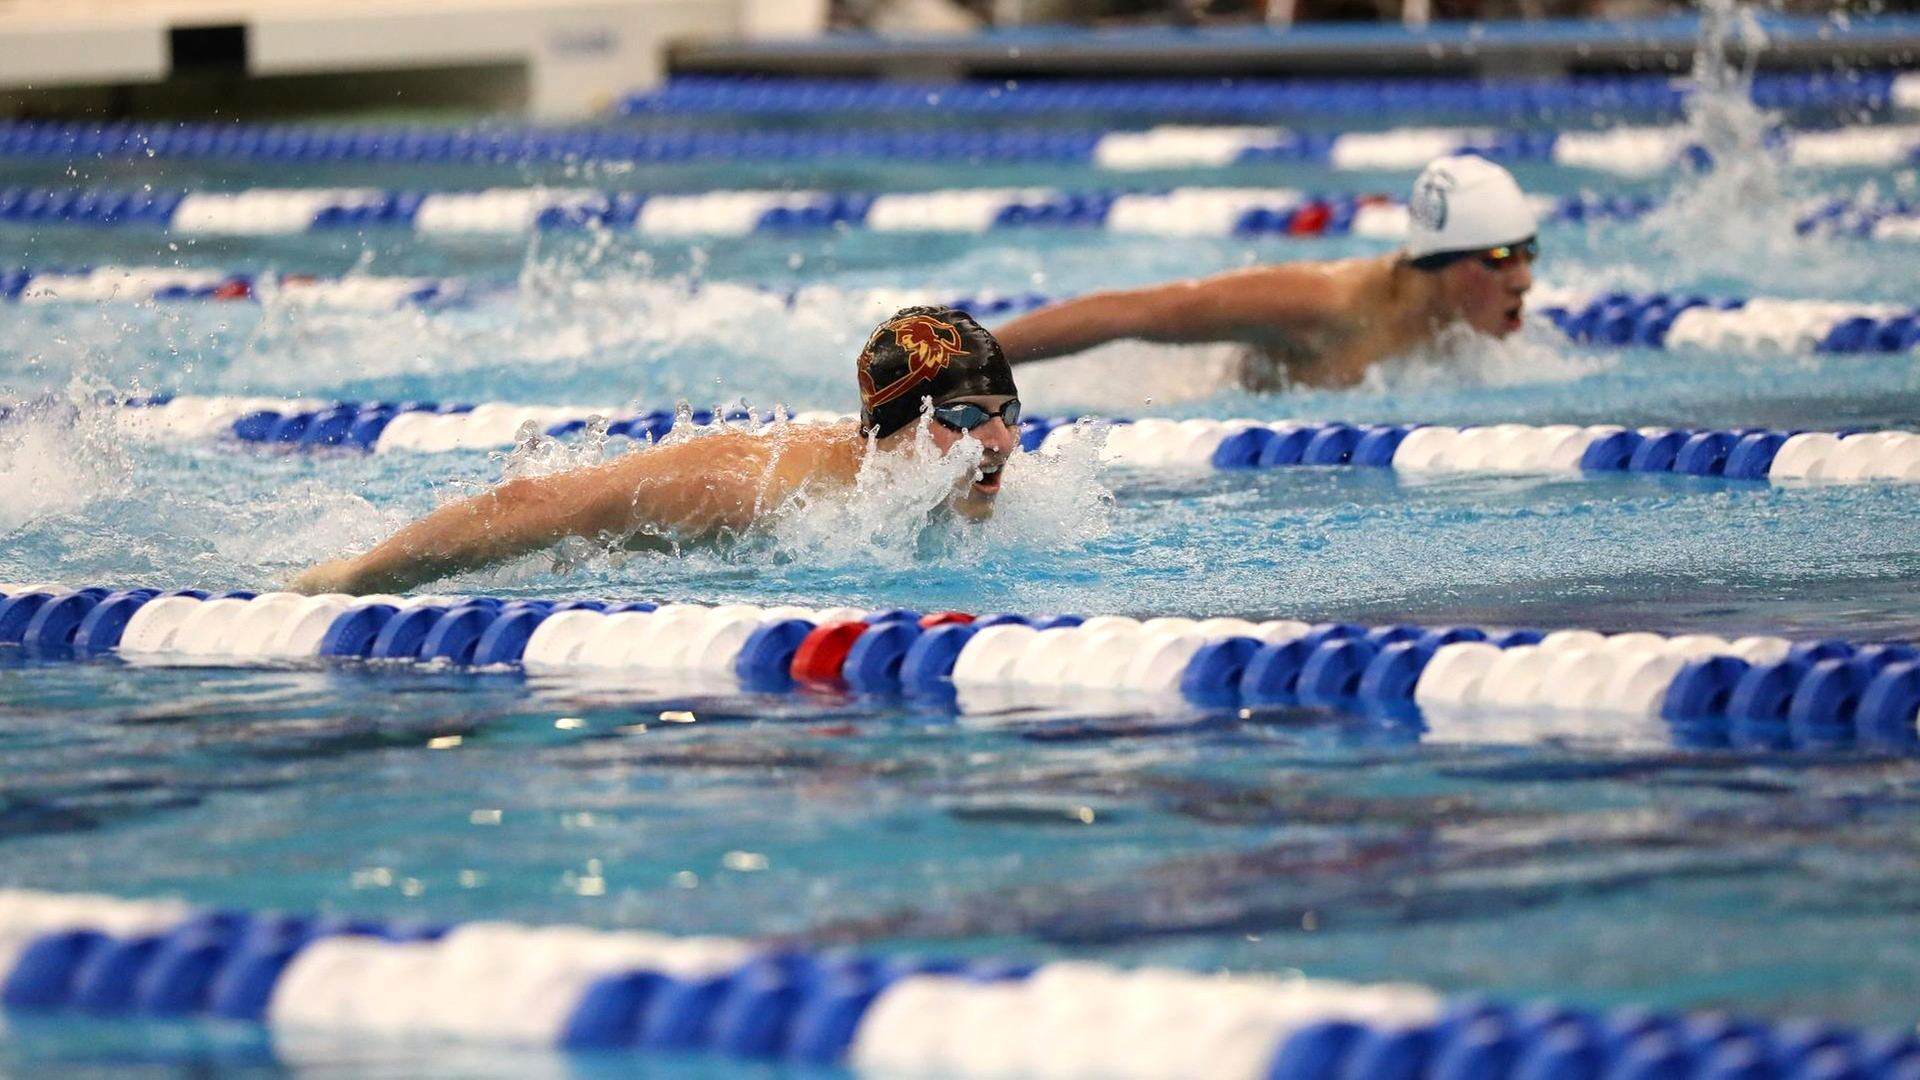 Two male swimmers compete in the pool wearing school swim caps.